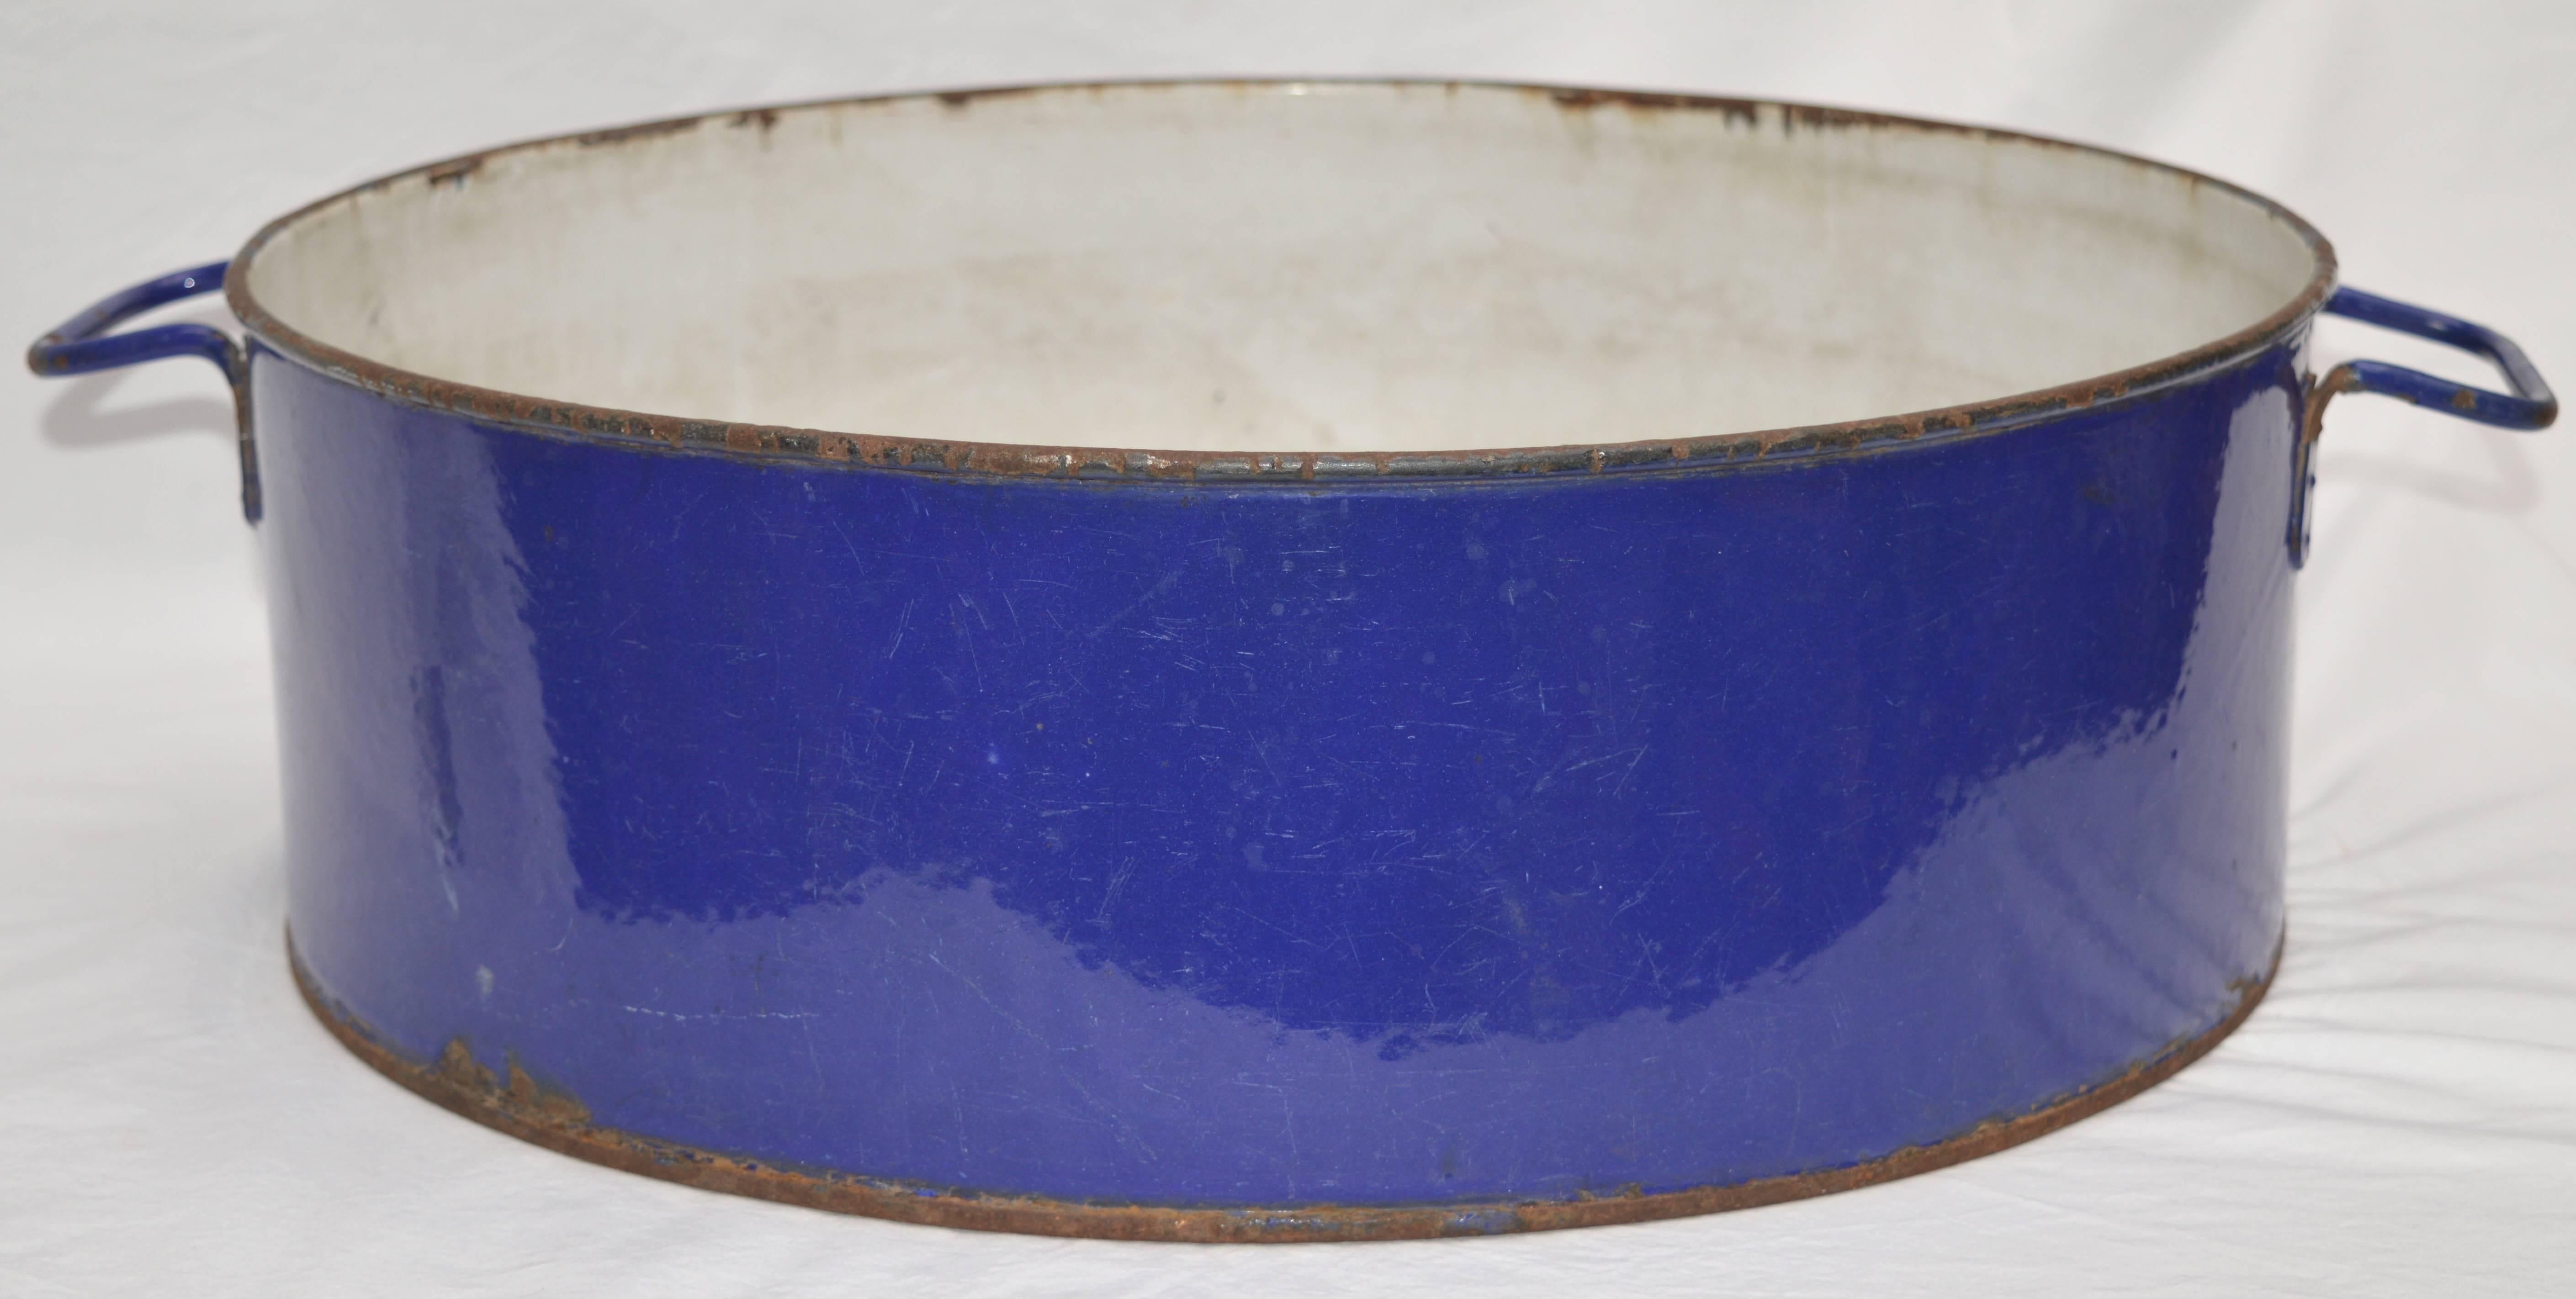 This is a two handled Hungarian vessel used on farms for gathering and washing fruits and vegetables. Great royal blue enamel color makes this a cool center piece or a place to put magazines or bath towels
 The last photo is an example how this